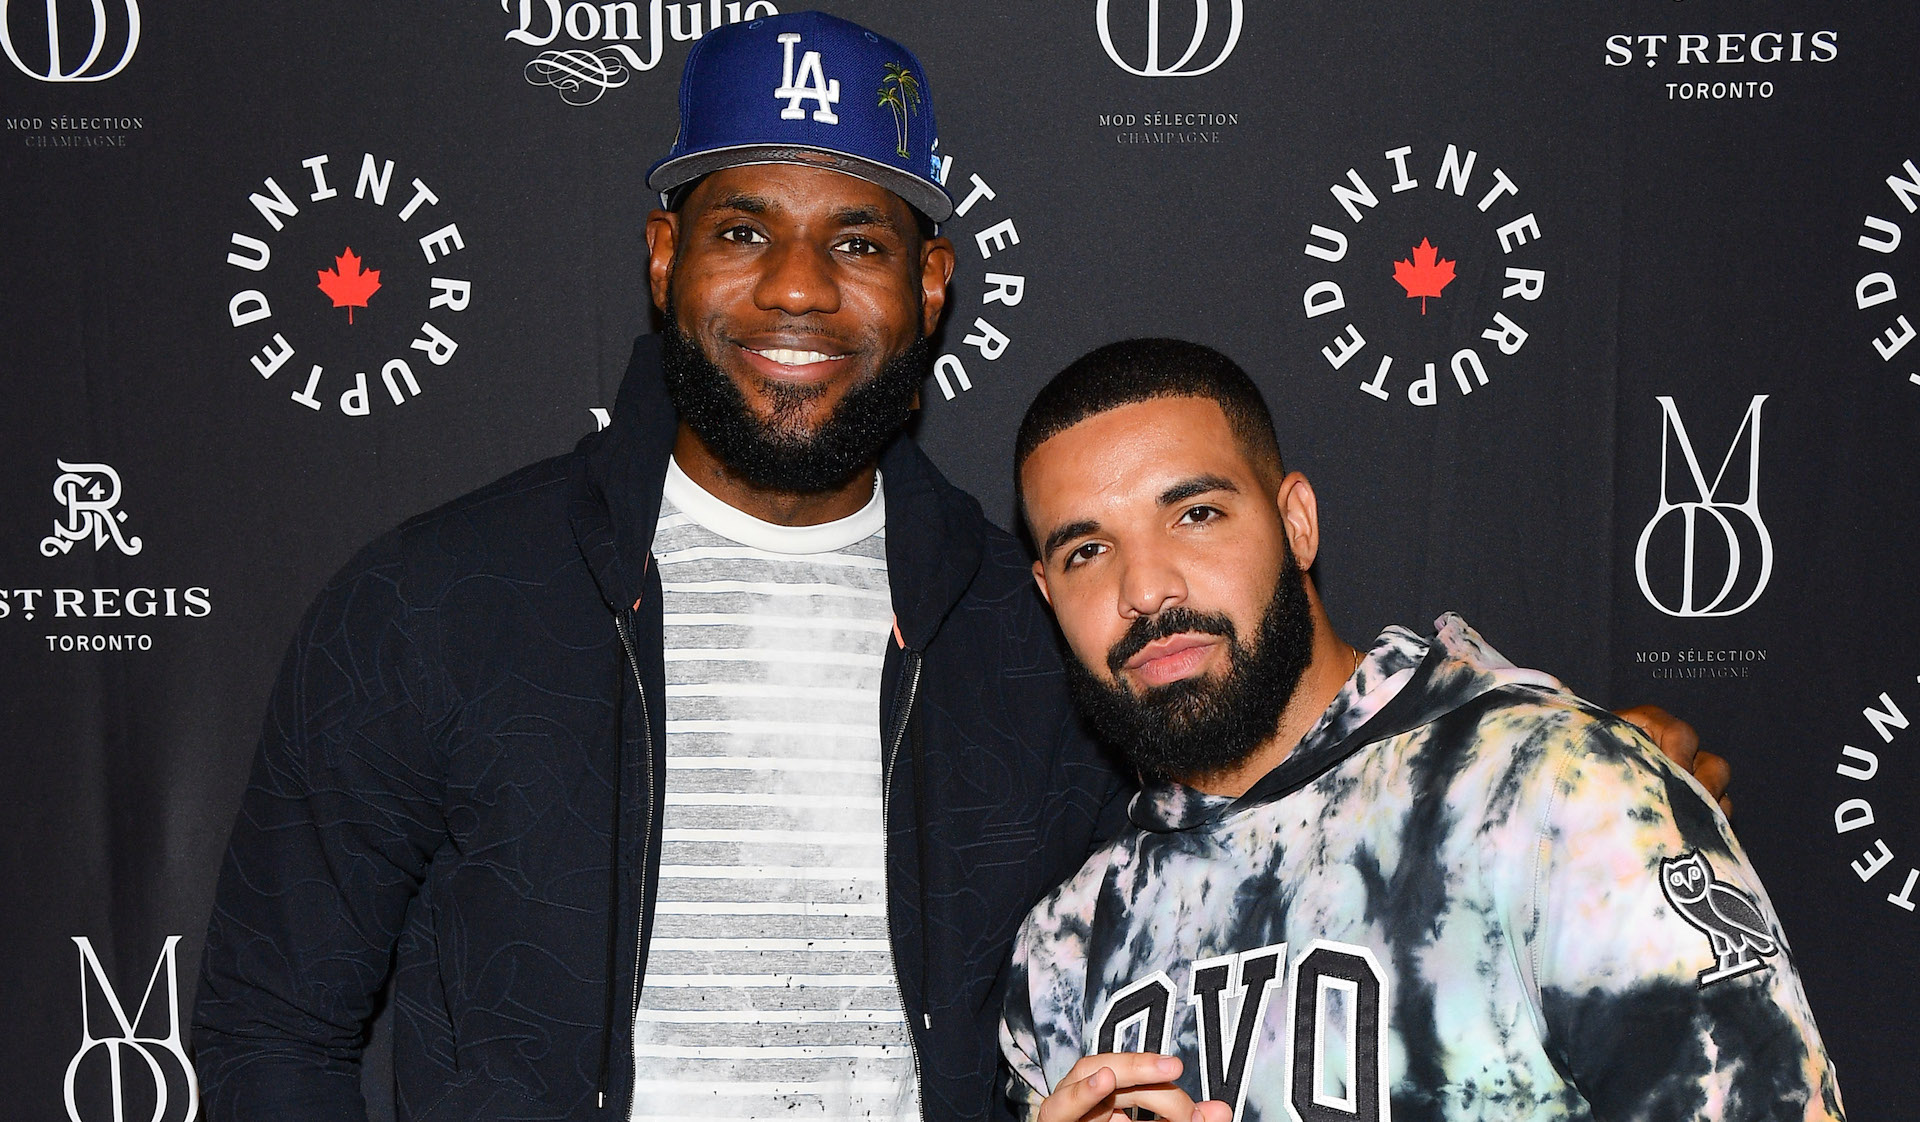 Drake and LeBron James Among Group of Investors Closing in on Takeover of AC Milan